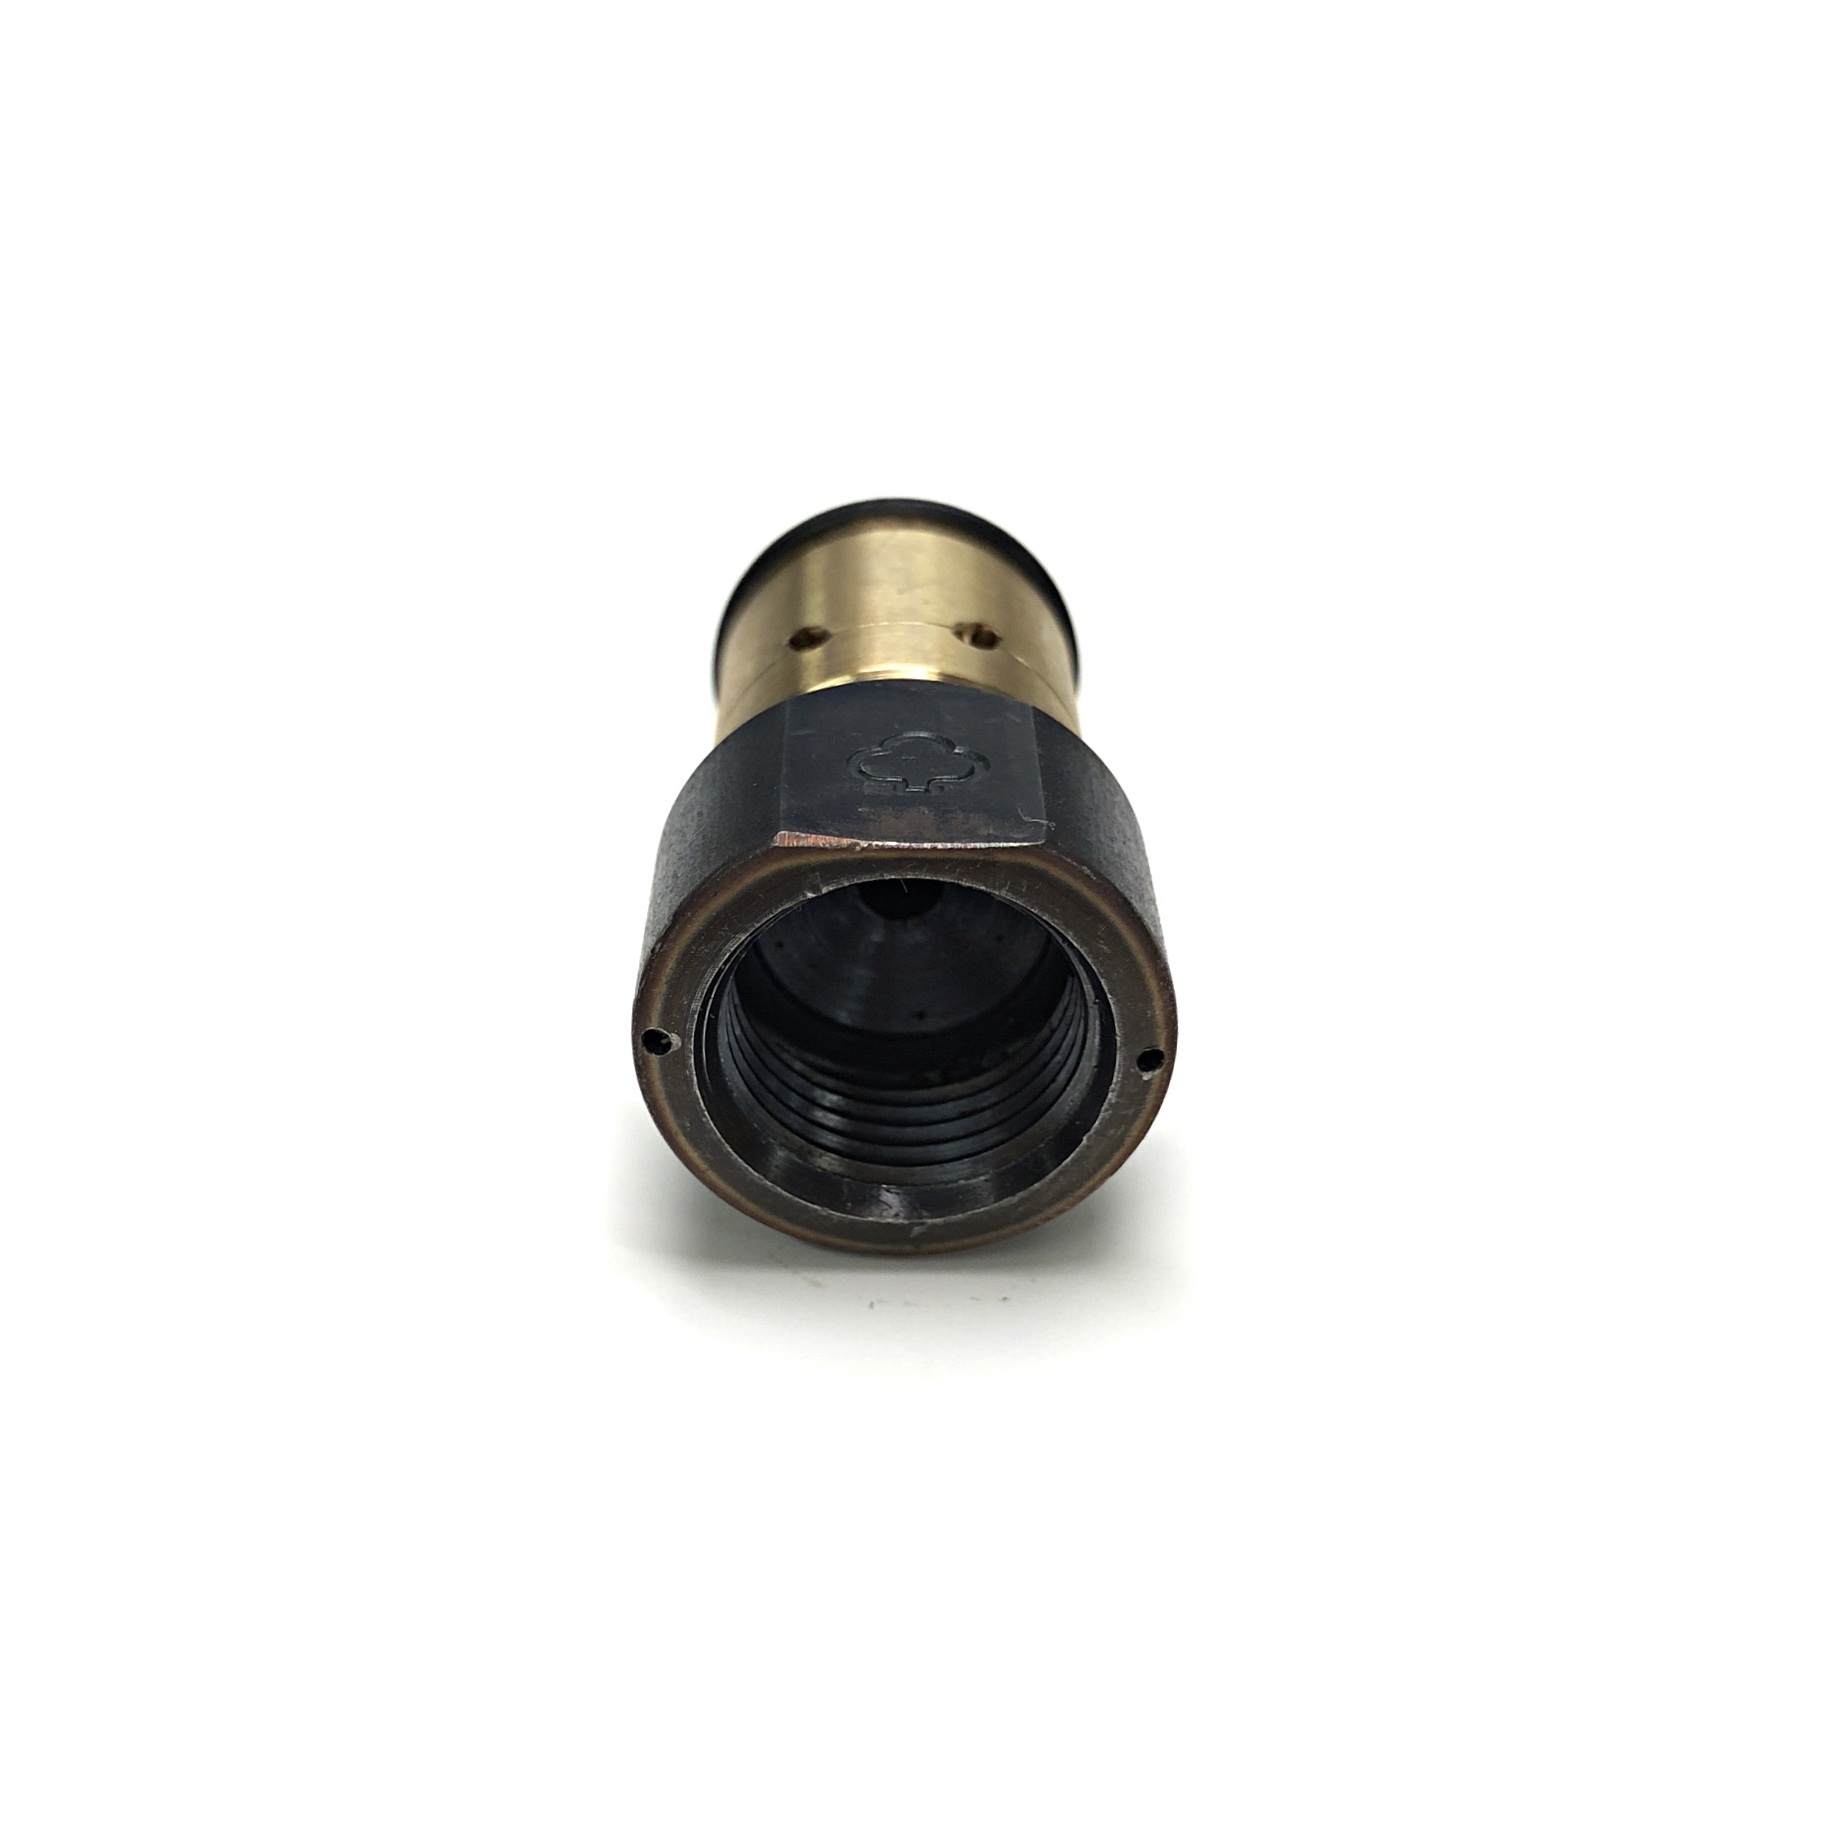 3/8" Rotator Nozzle Back View